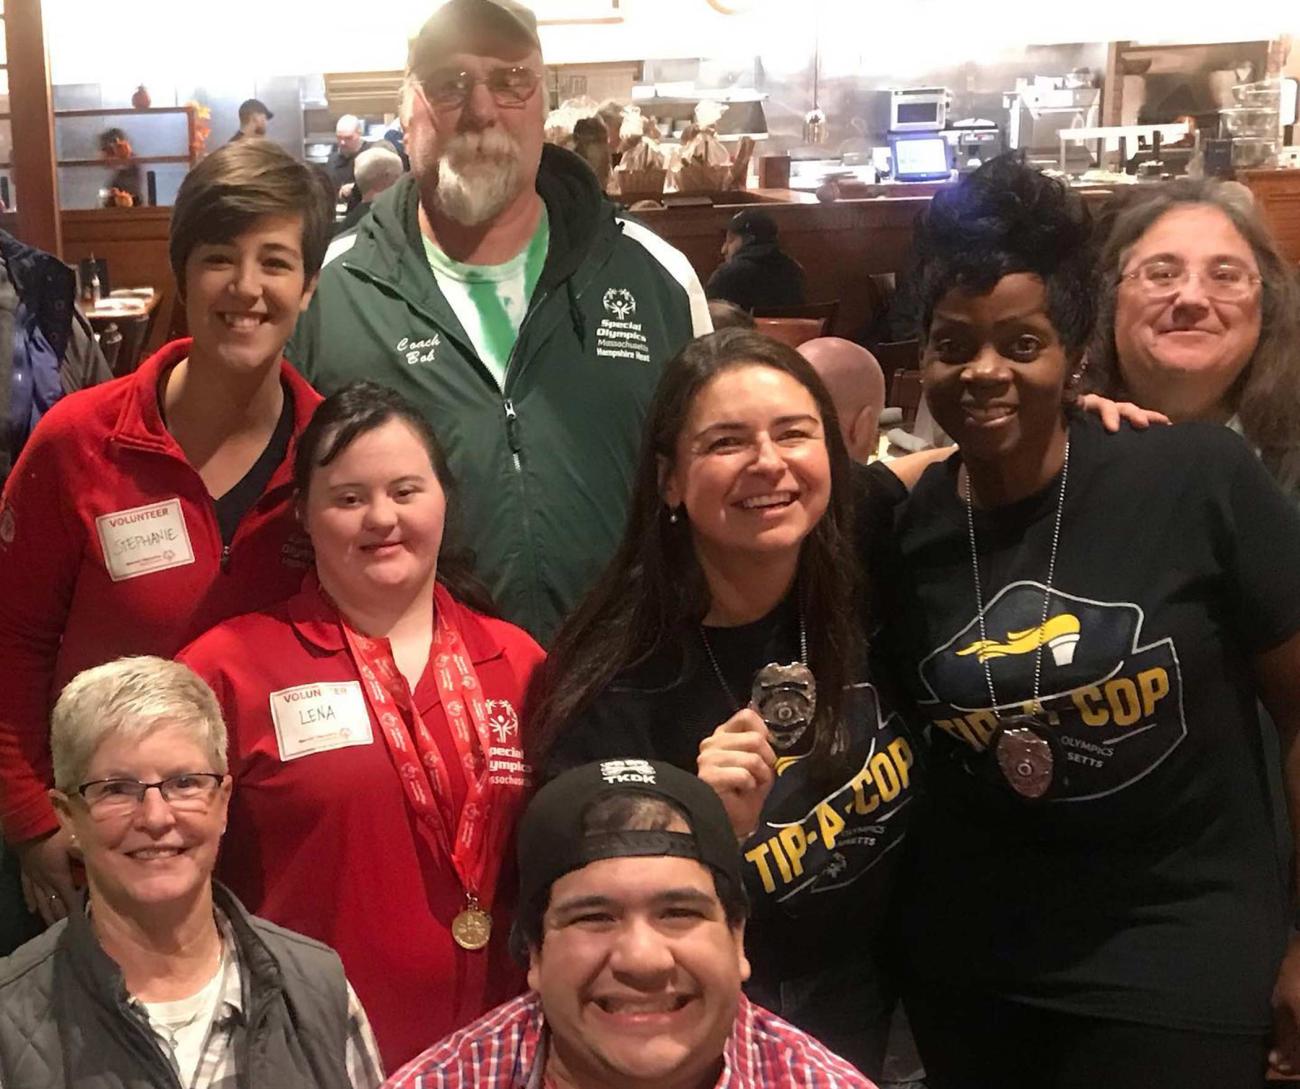 Springfield College Community Policing Liaison Cheri Burton participated in the Law Enforcement Torch Run Program Tip-A-Cop fundraiser at Carrabba’s Italian Grill